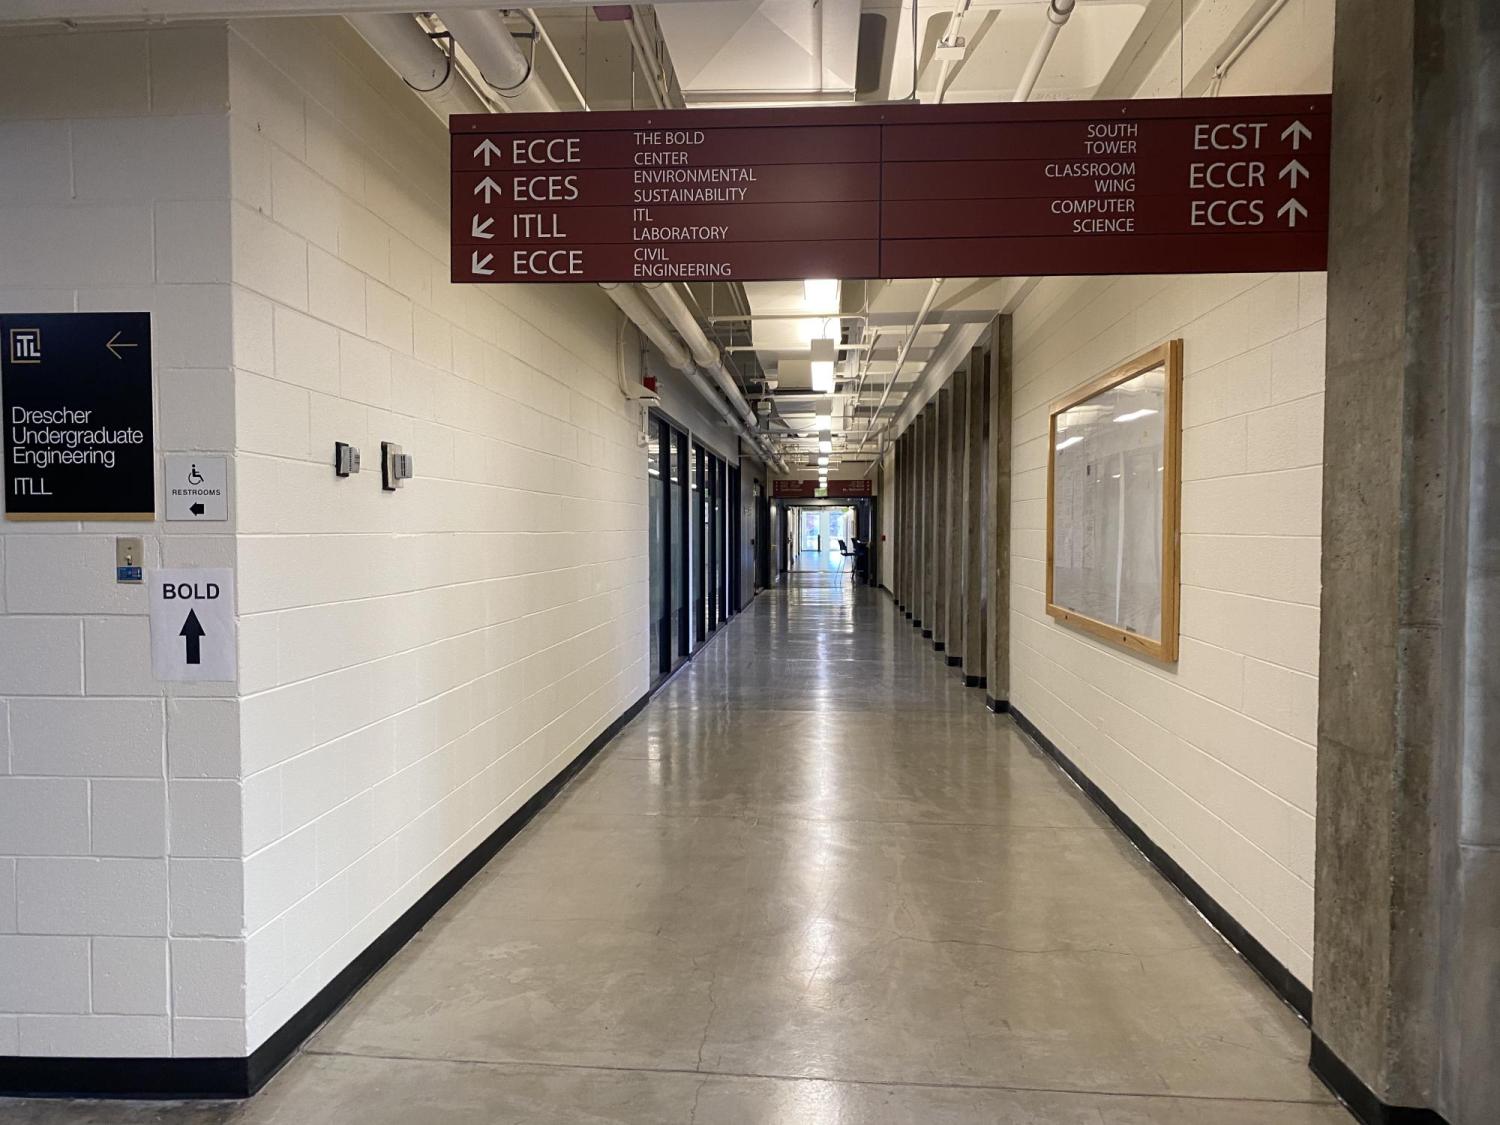 The hallway to the BOLD Center